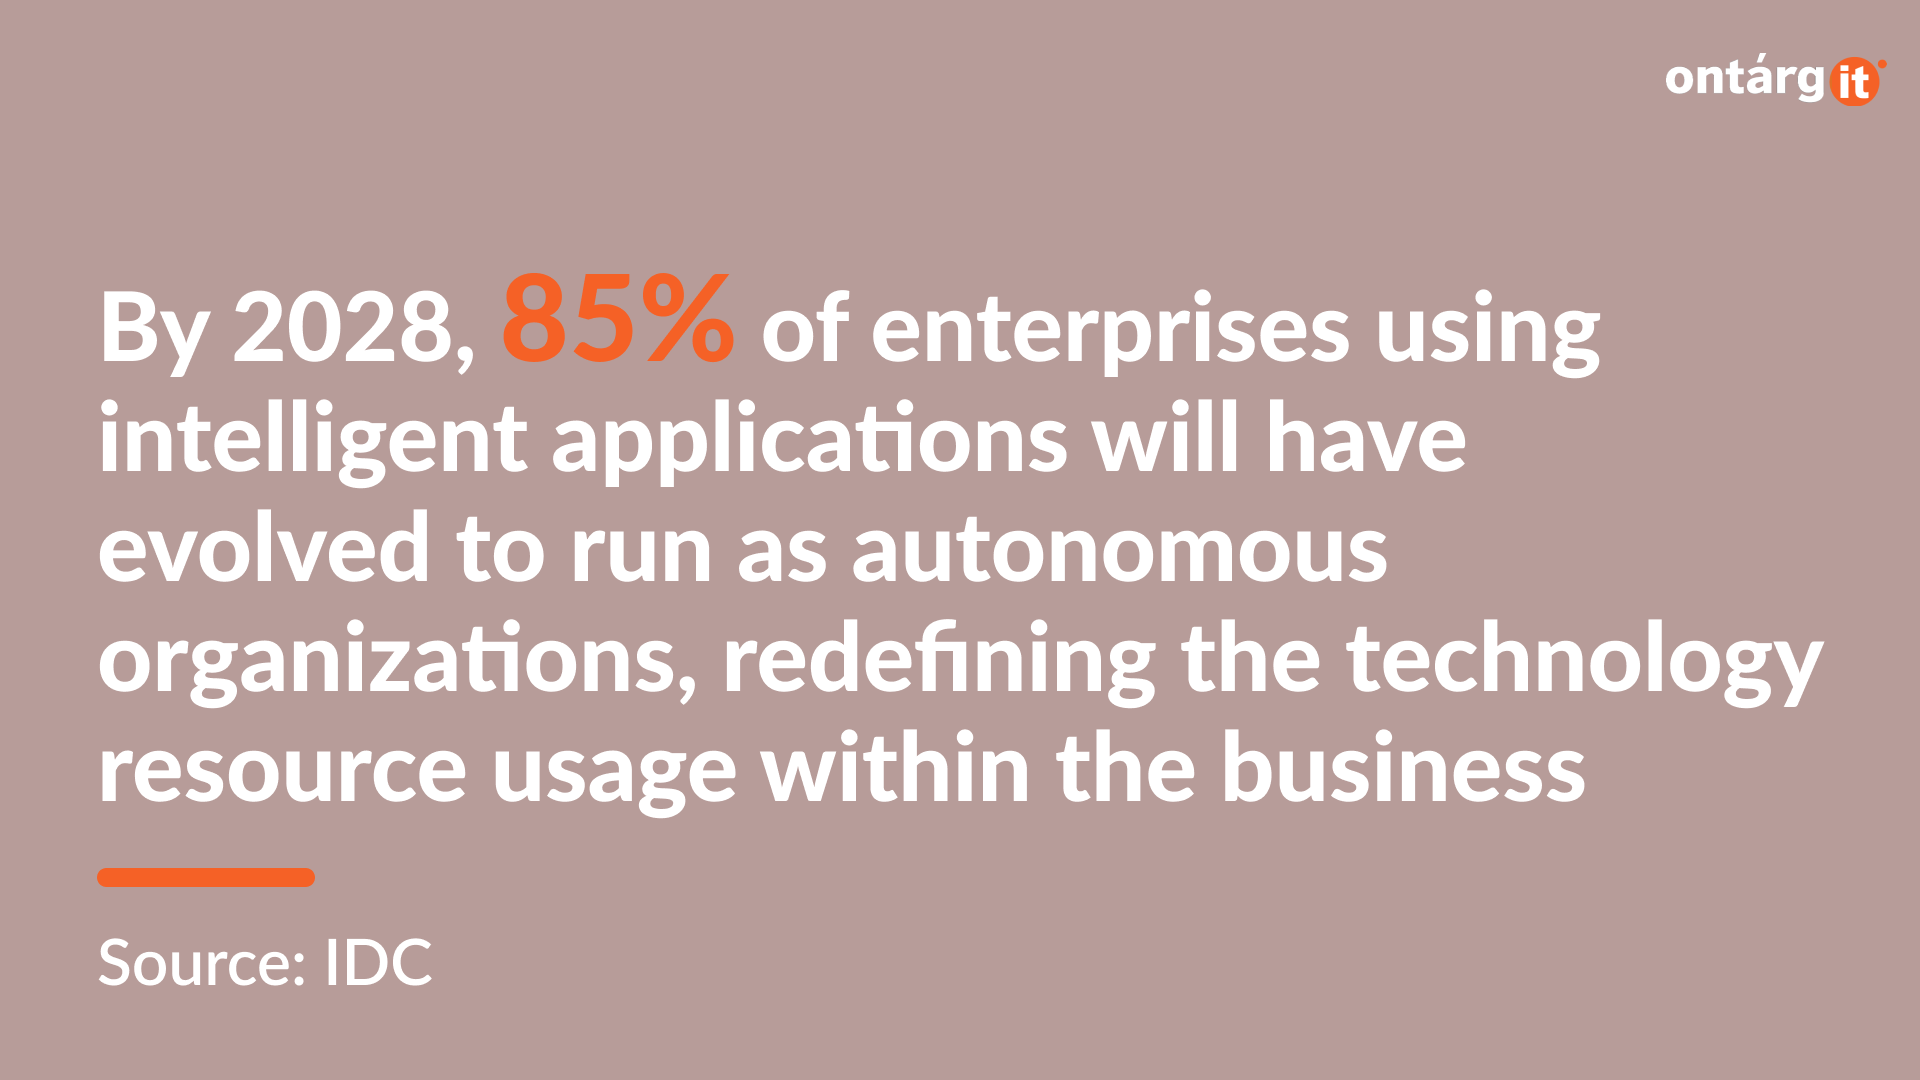 By 2028, 85% of enterprises using intelligent applications will have evolved to run as autonomous organizations, redefining the technology resource usage within the business